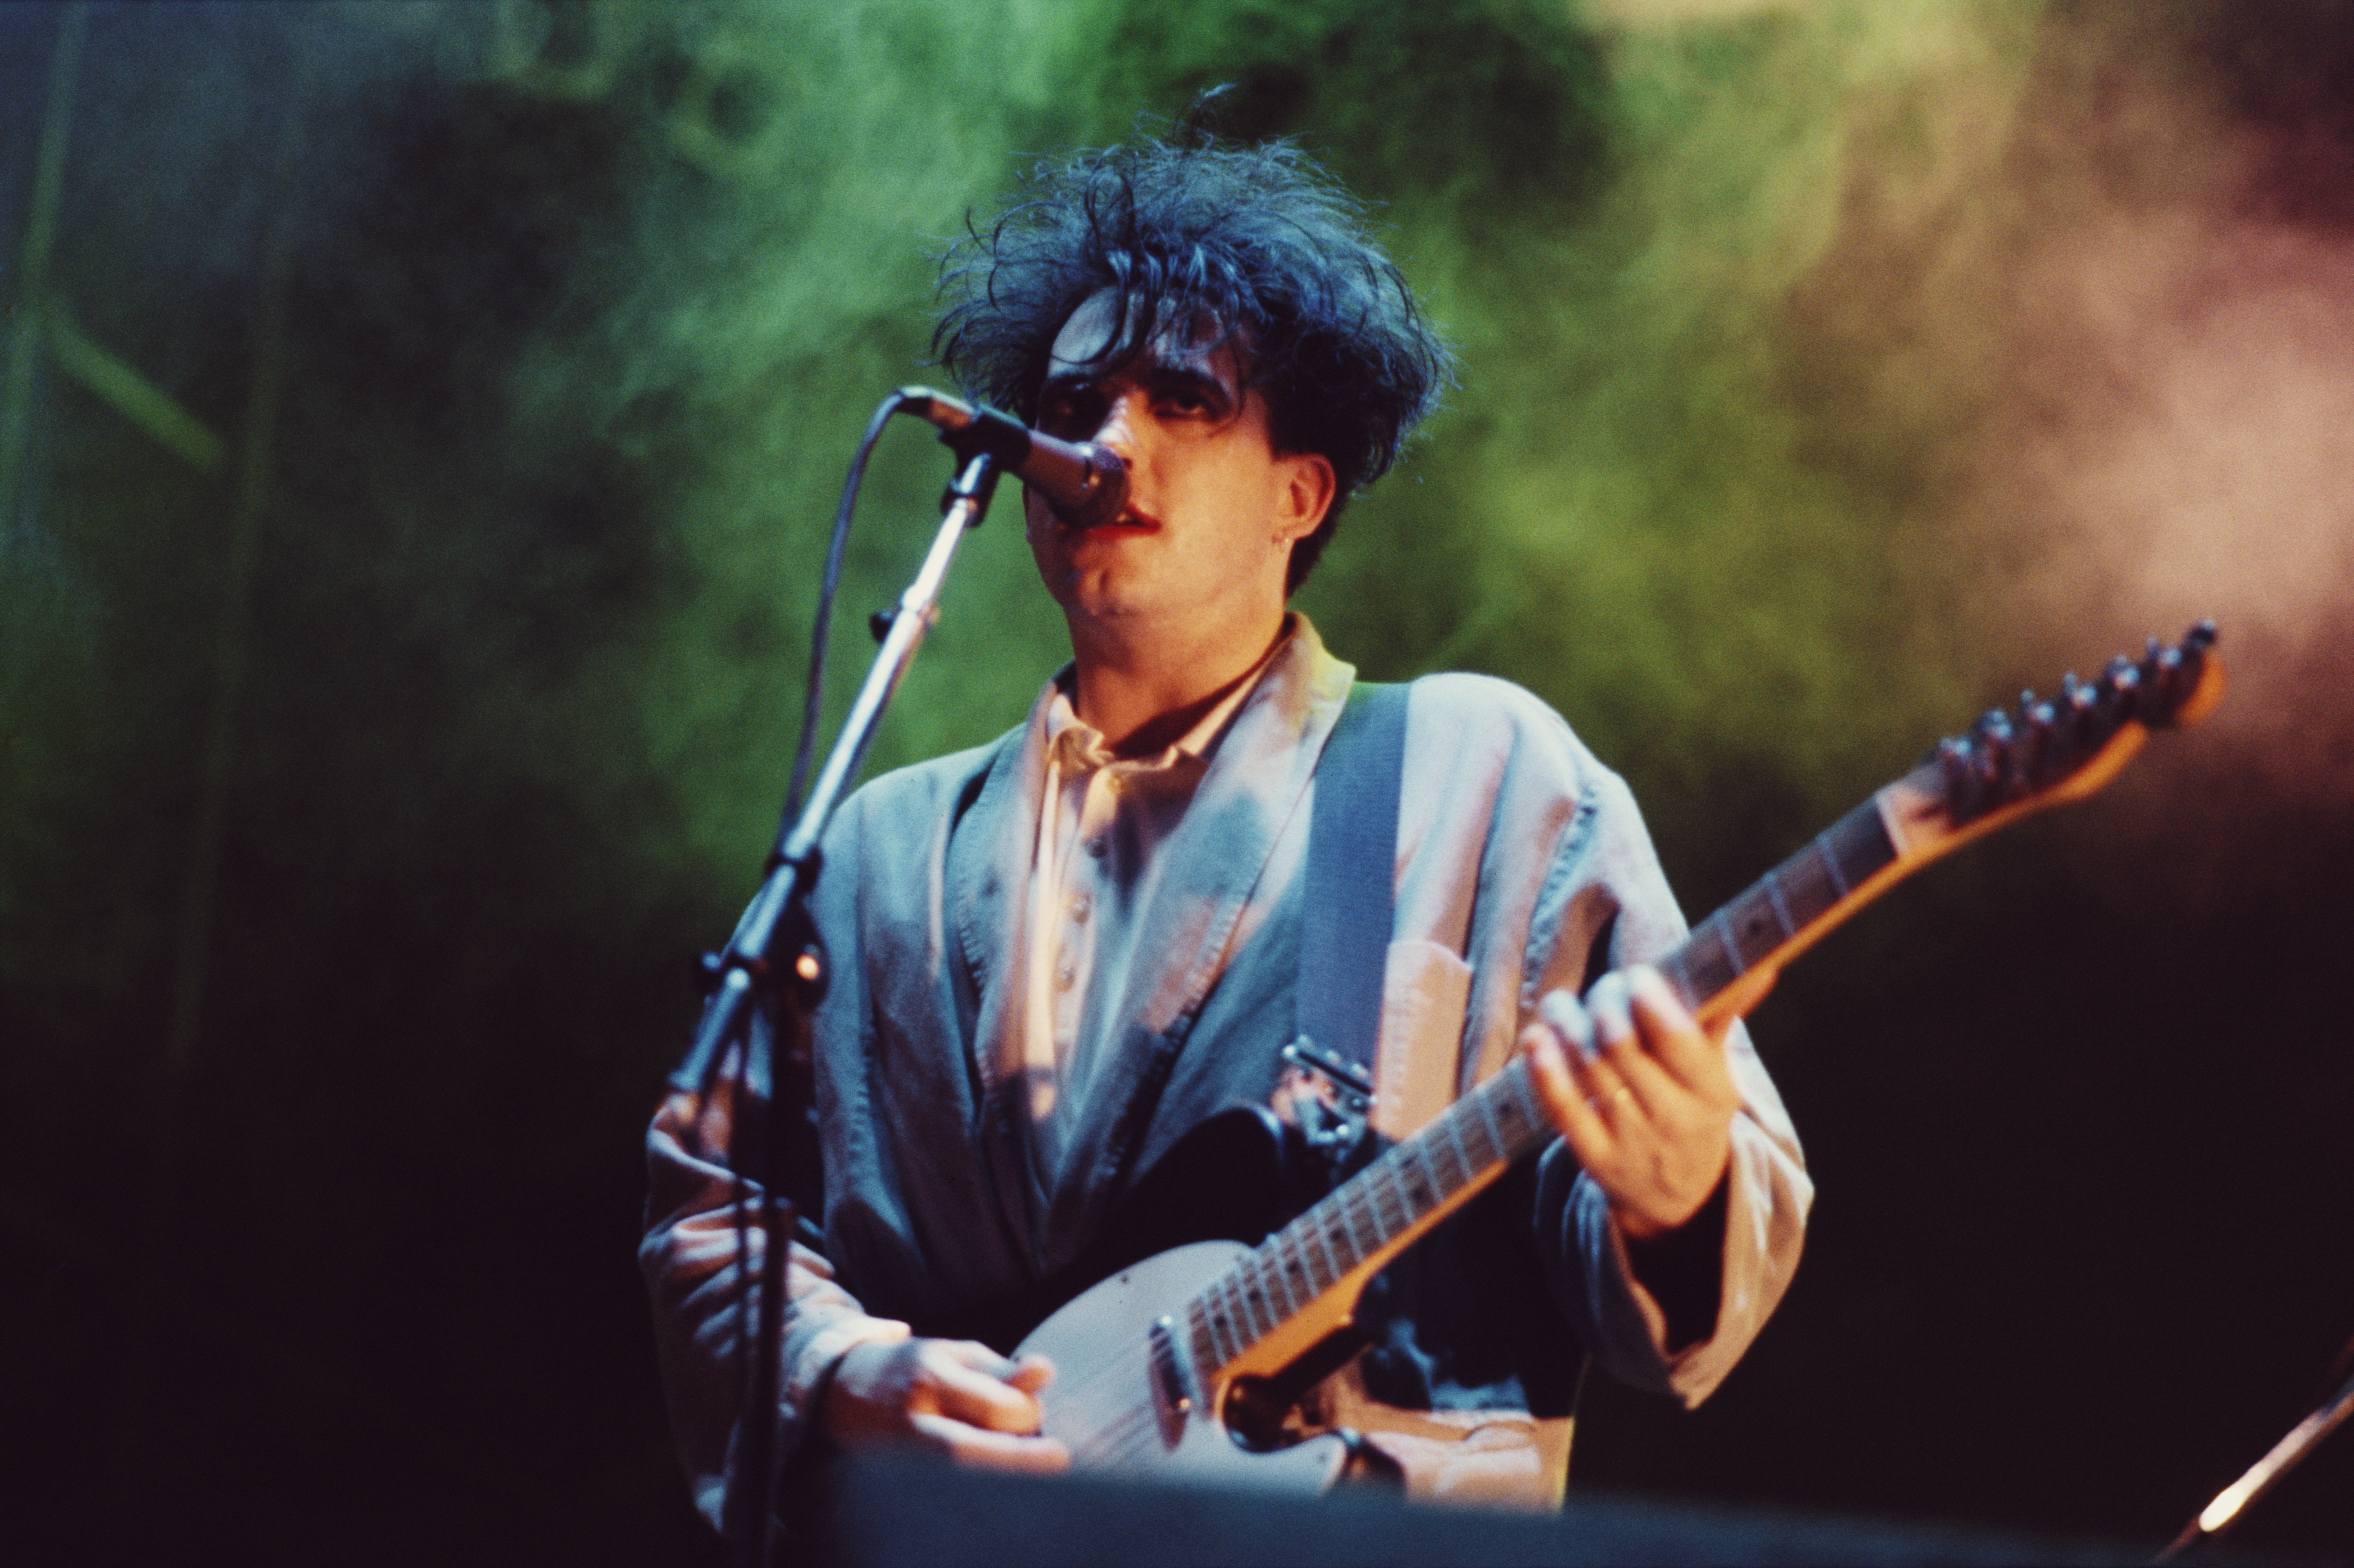 Robert Smith of The Cure performs on stage, Brazil, March 1987. | Source: Getty Images